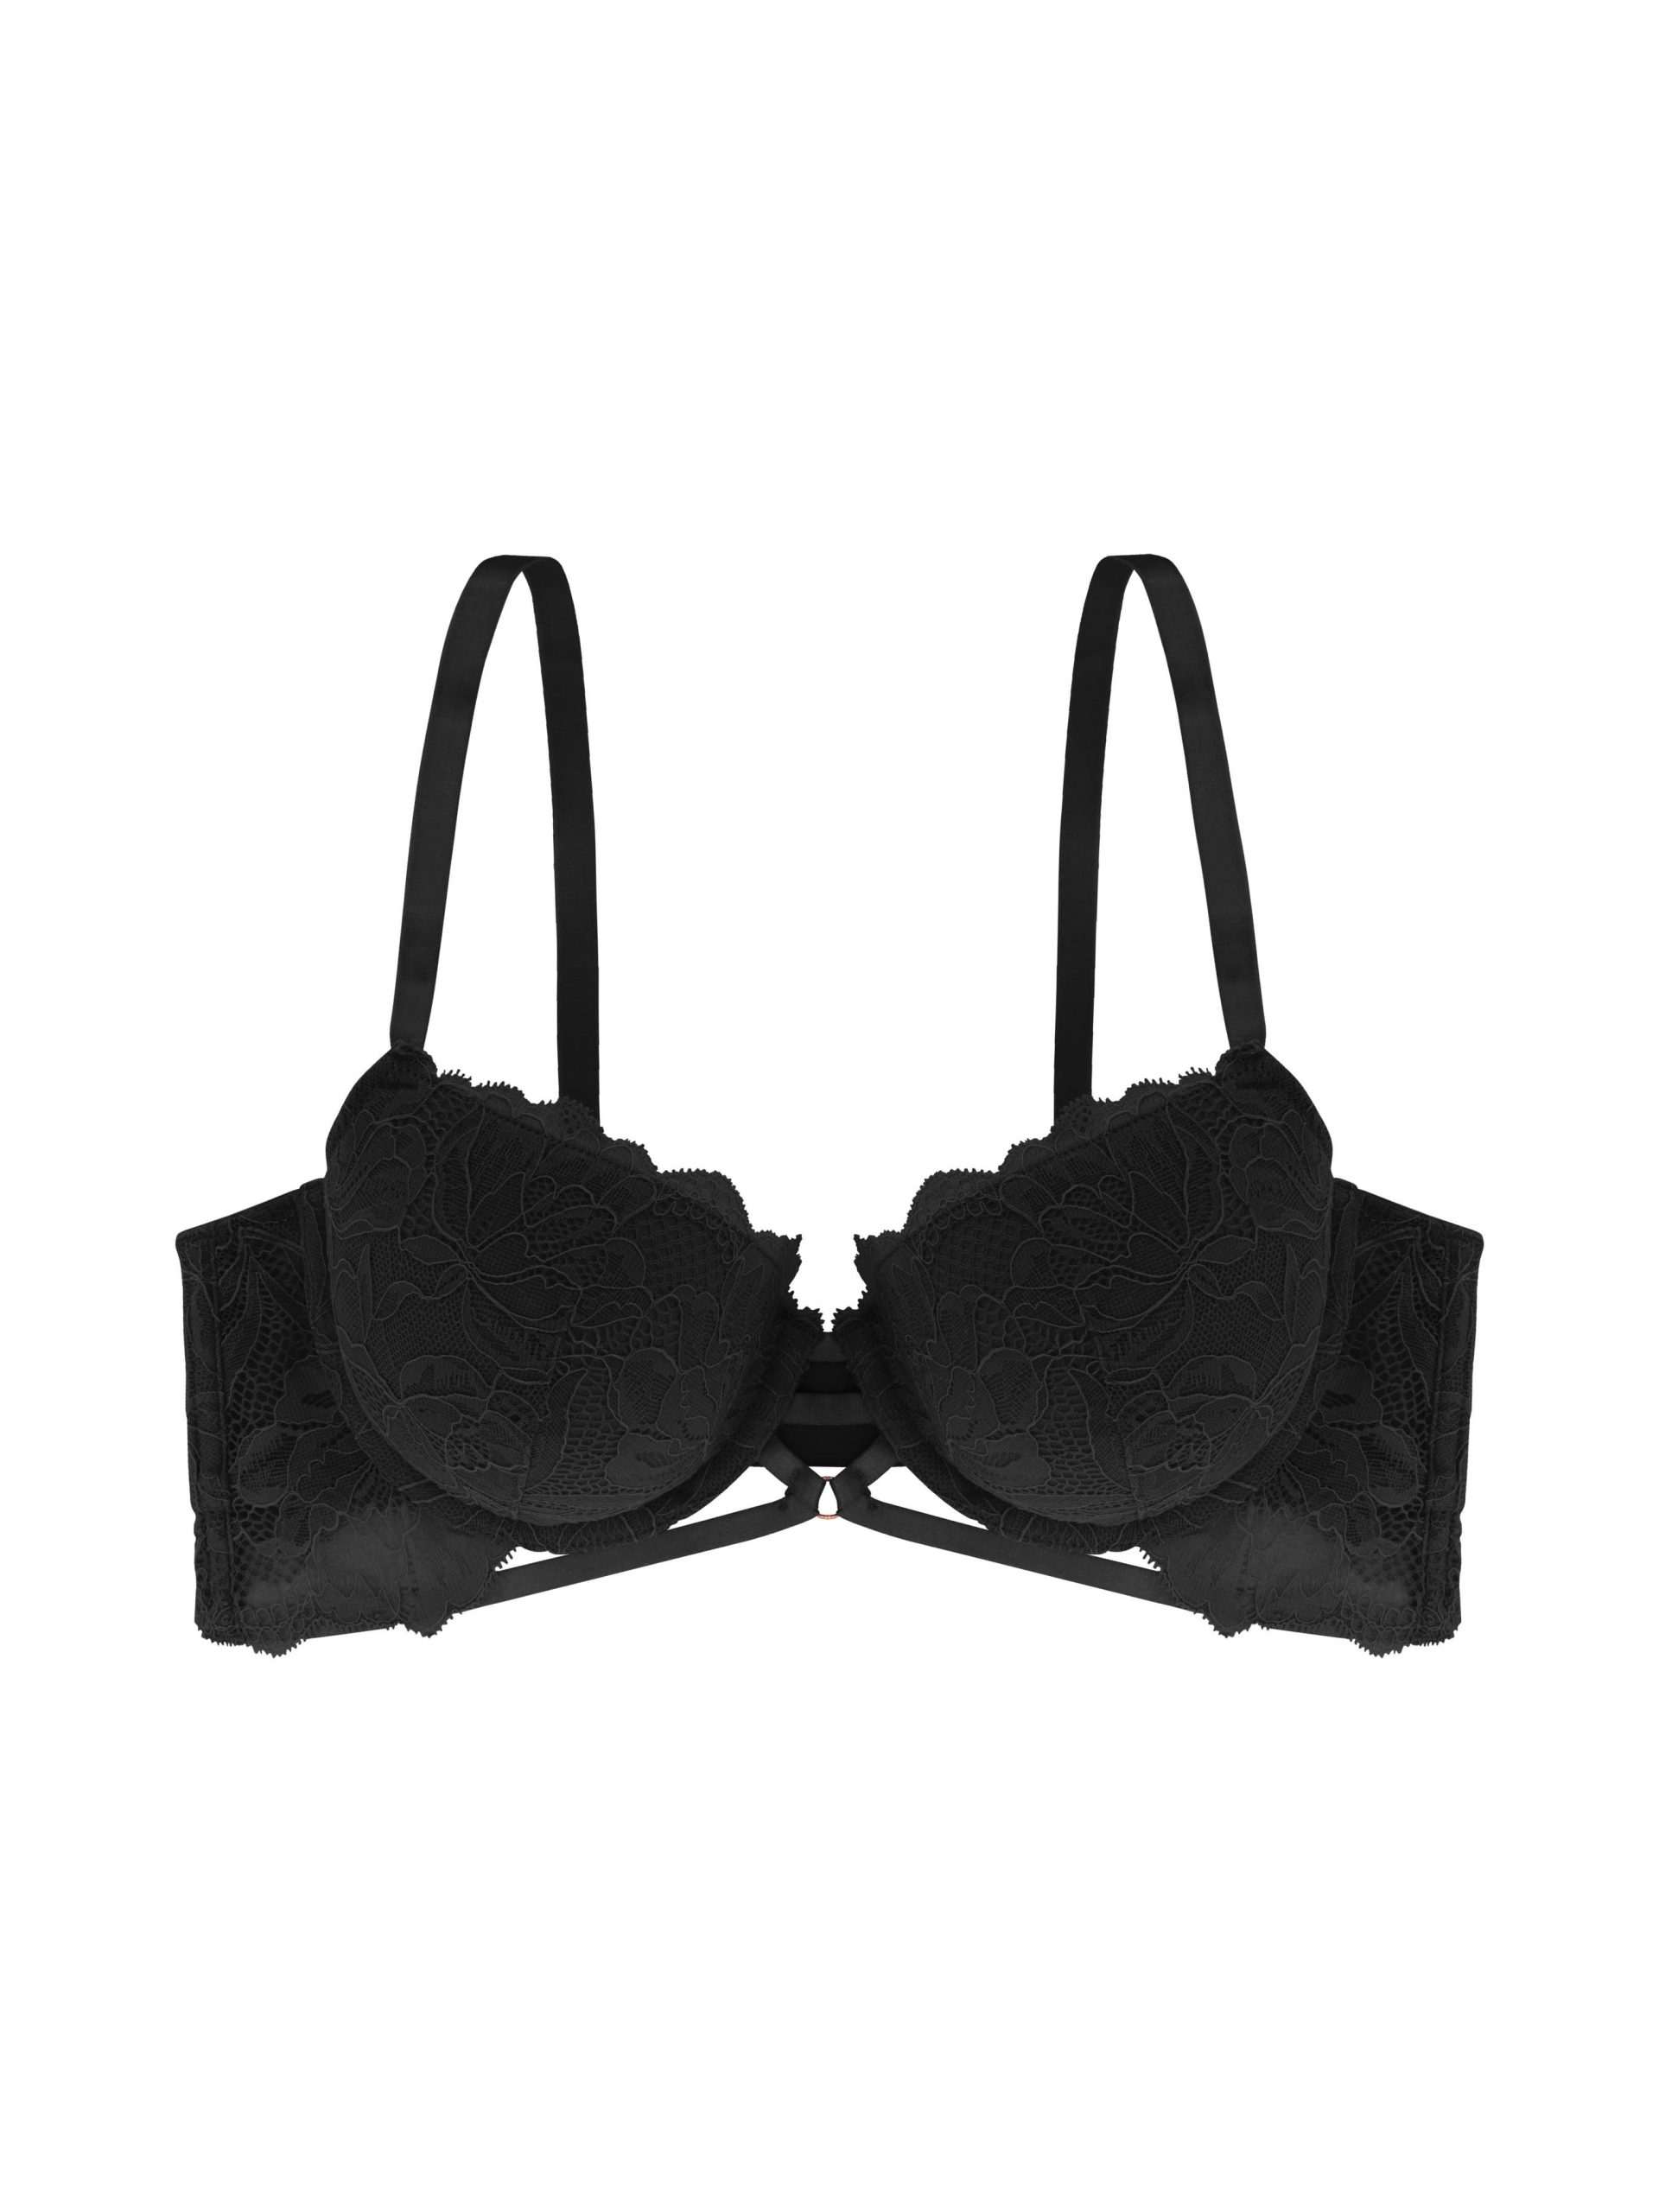 M&S Total Support Non-Wired Mesh lace bra Black sizes 36 - 42 B C D DD E  cups (36D) : : Everything Else